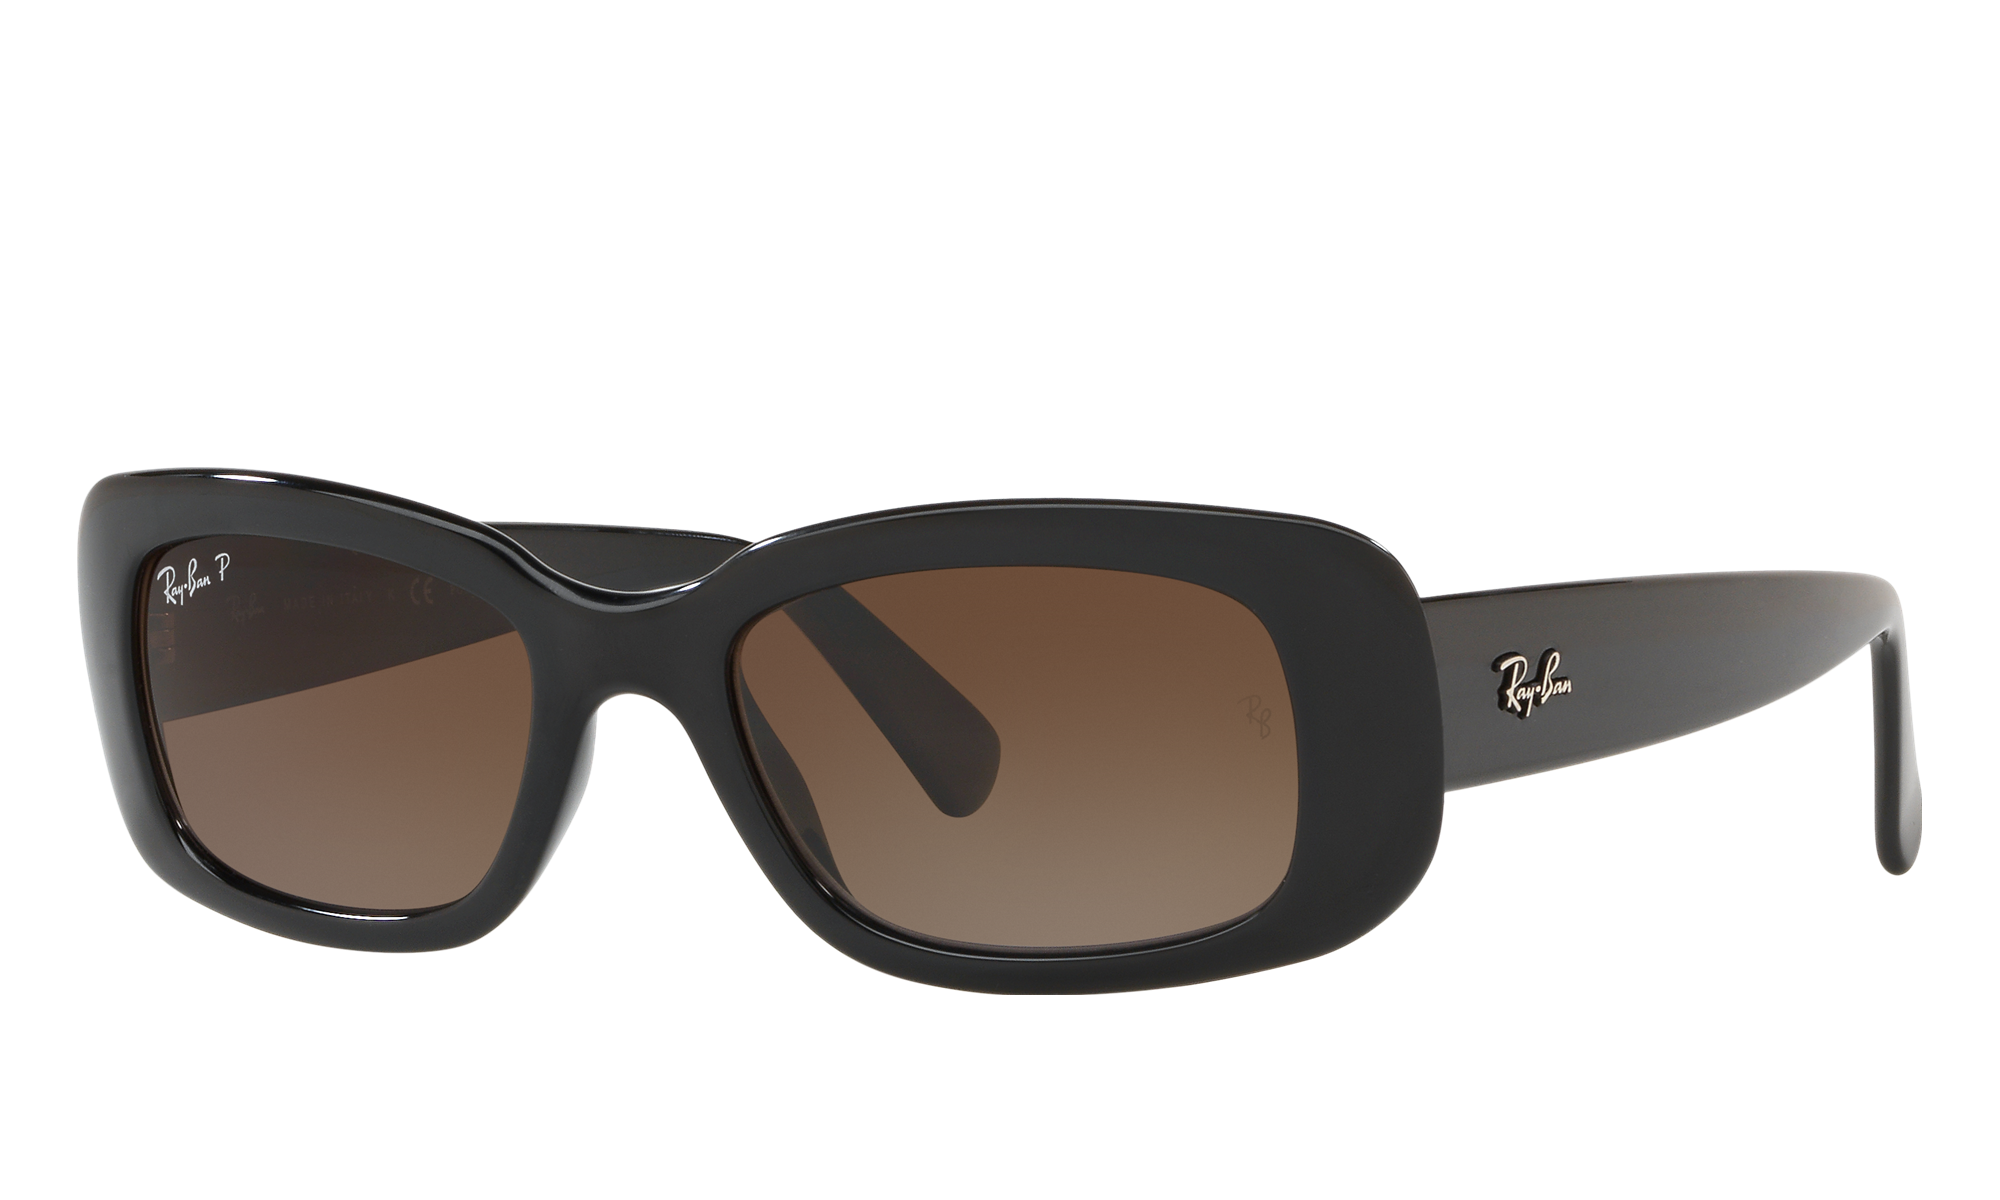 Ray-Ban Unisex Rb4122 Black Size: Extra Small